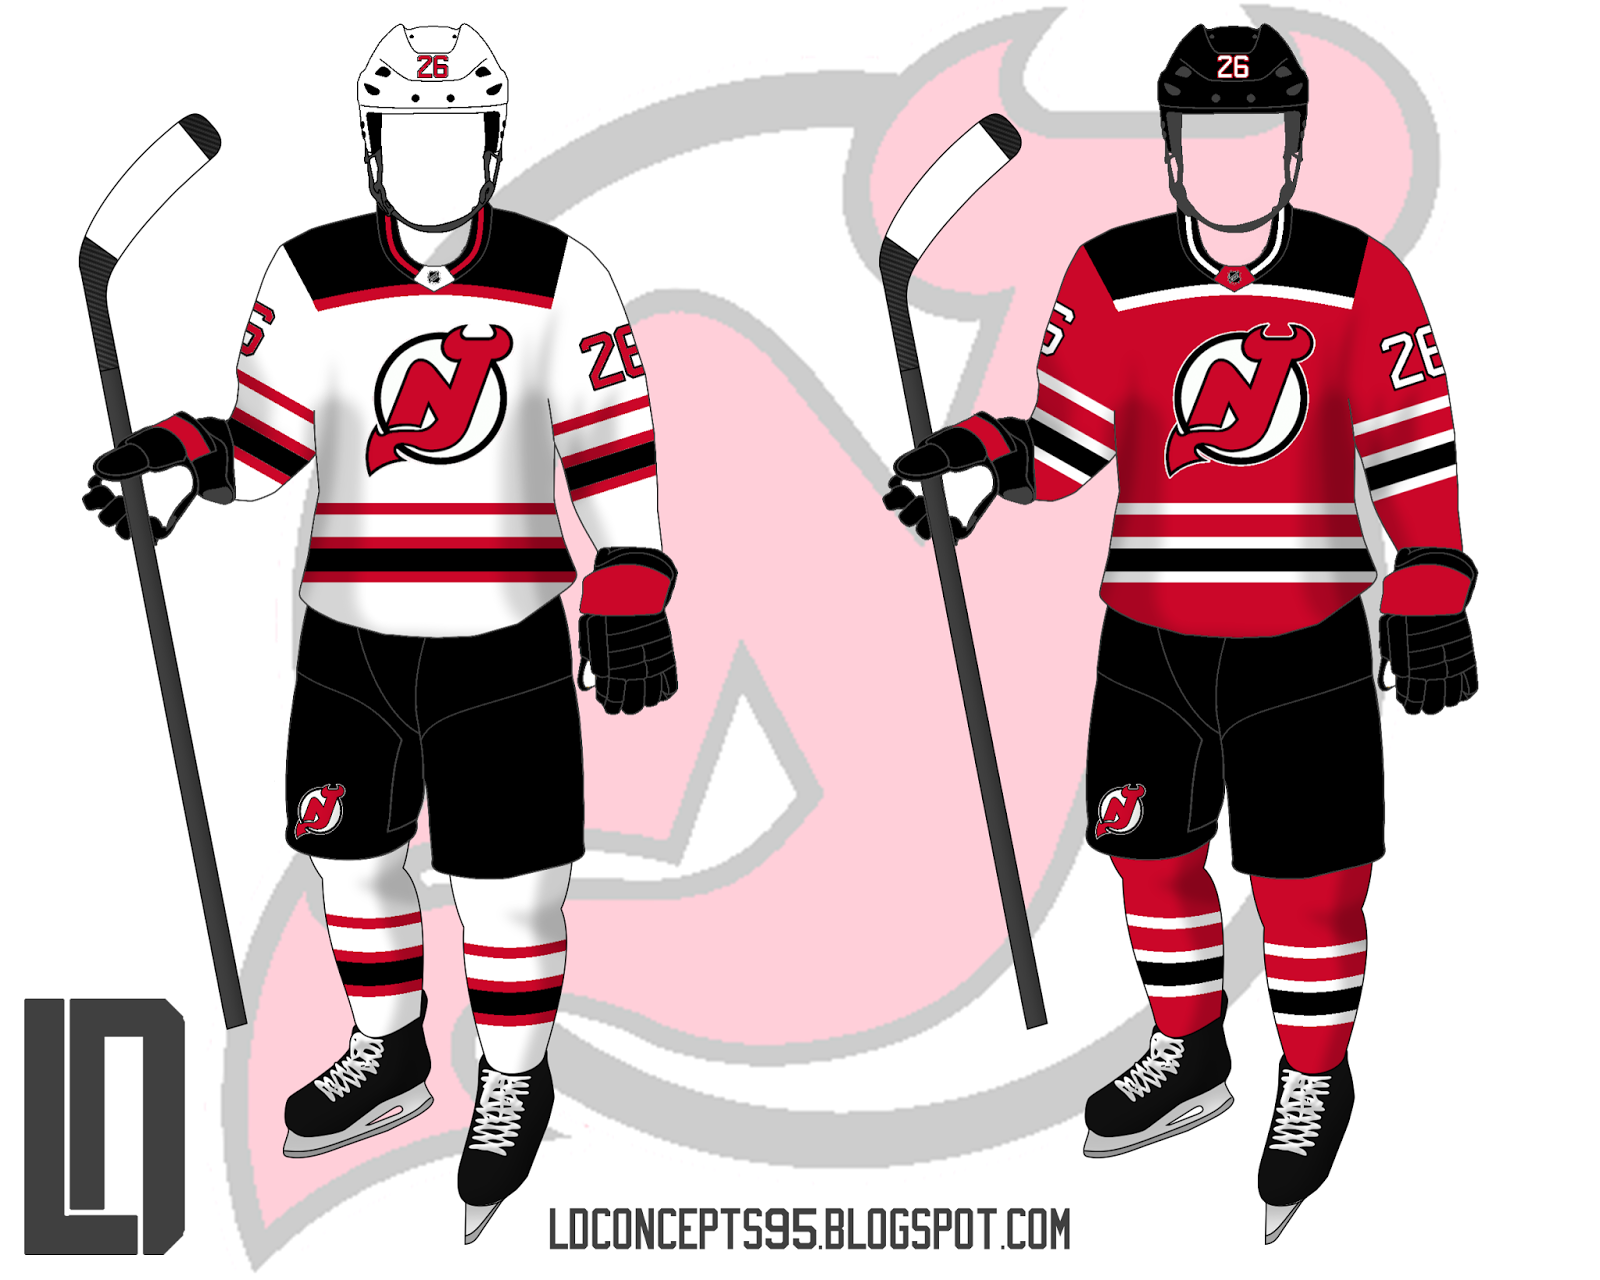 New+Jersey+Devils+Concept.png